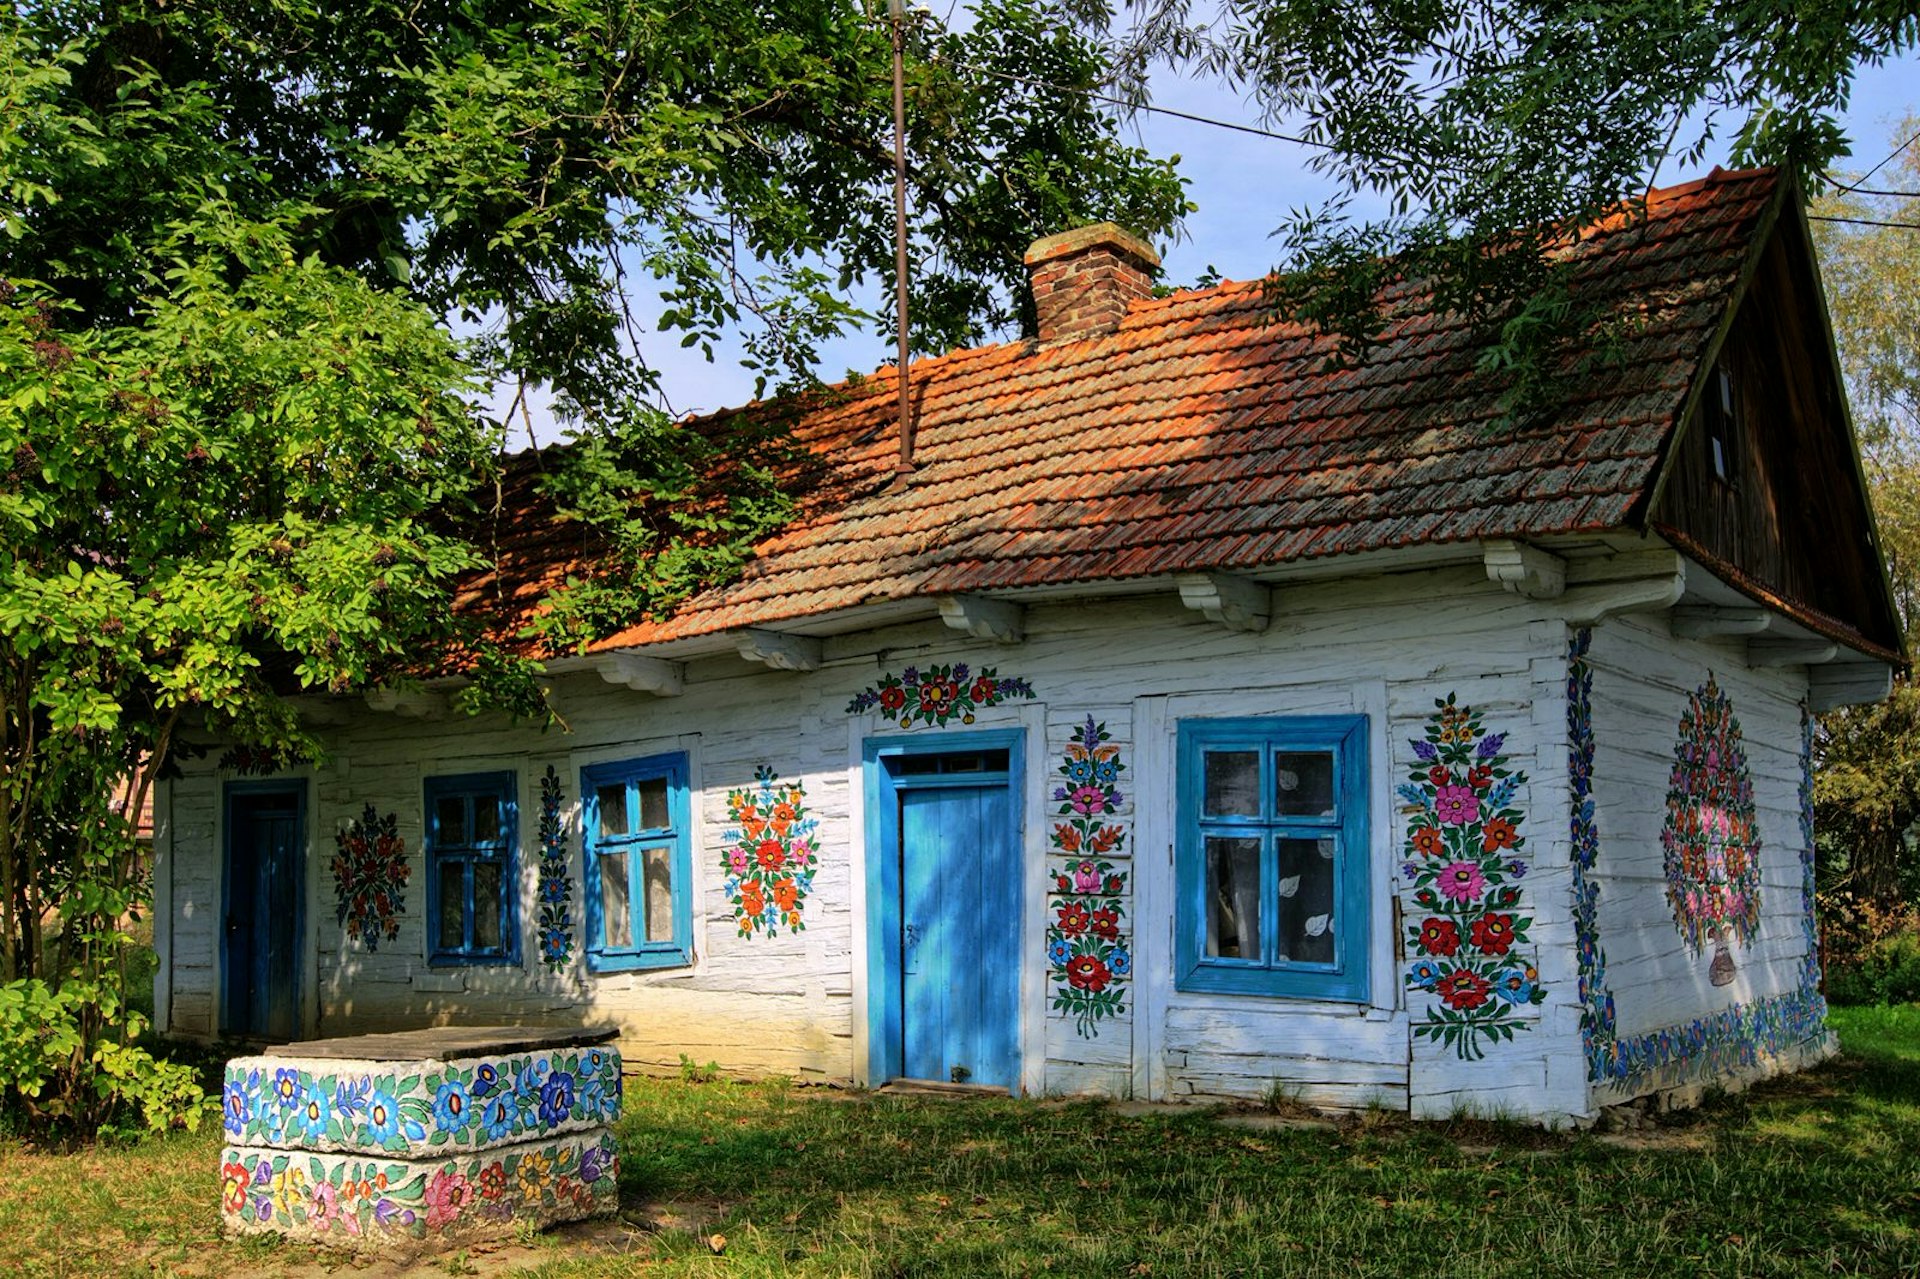 A traditional cottage in Zalipie, Poland, decorated in painted floral patterns © Pawel Litwinski / Getty Images